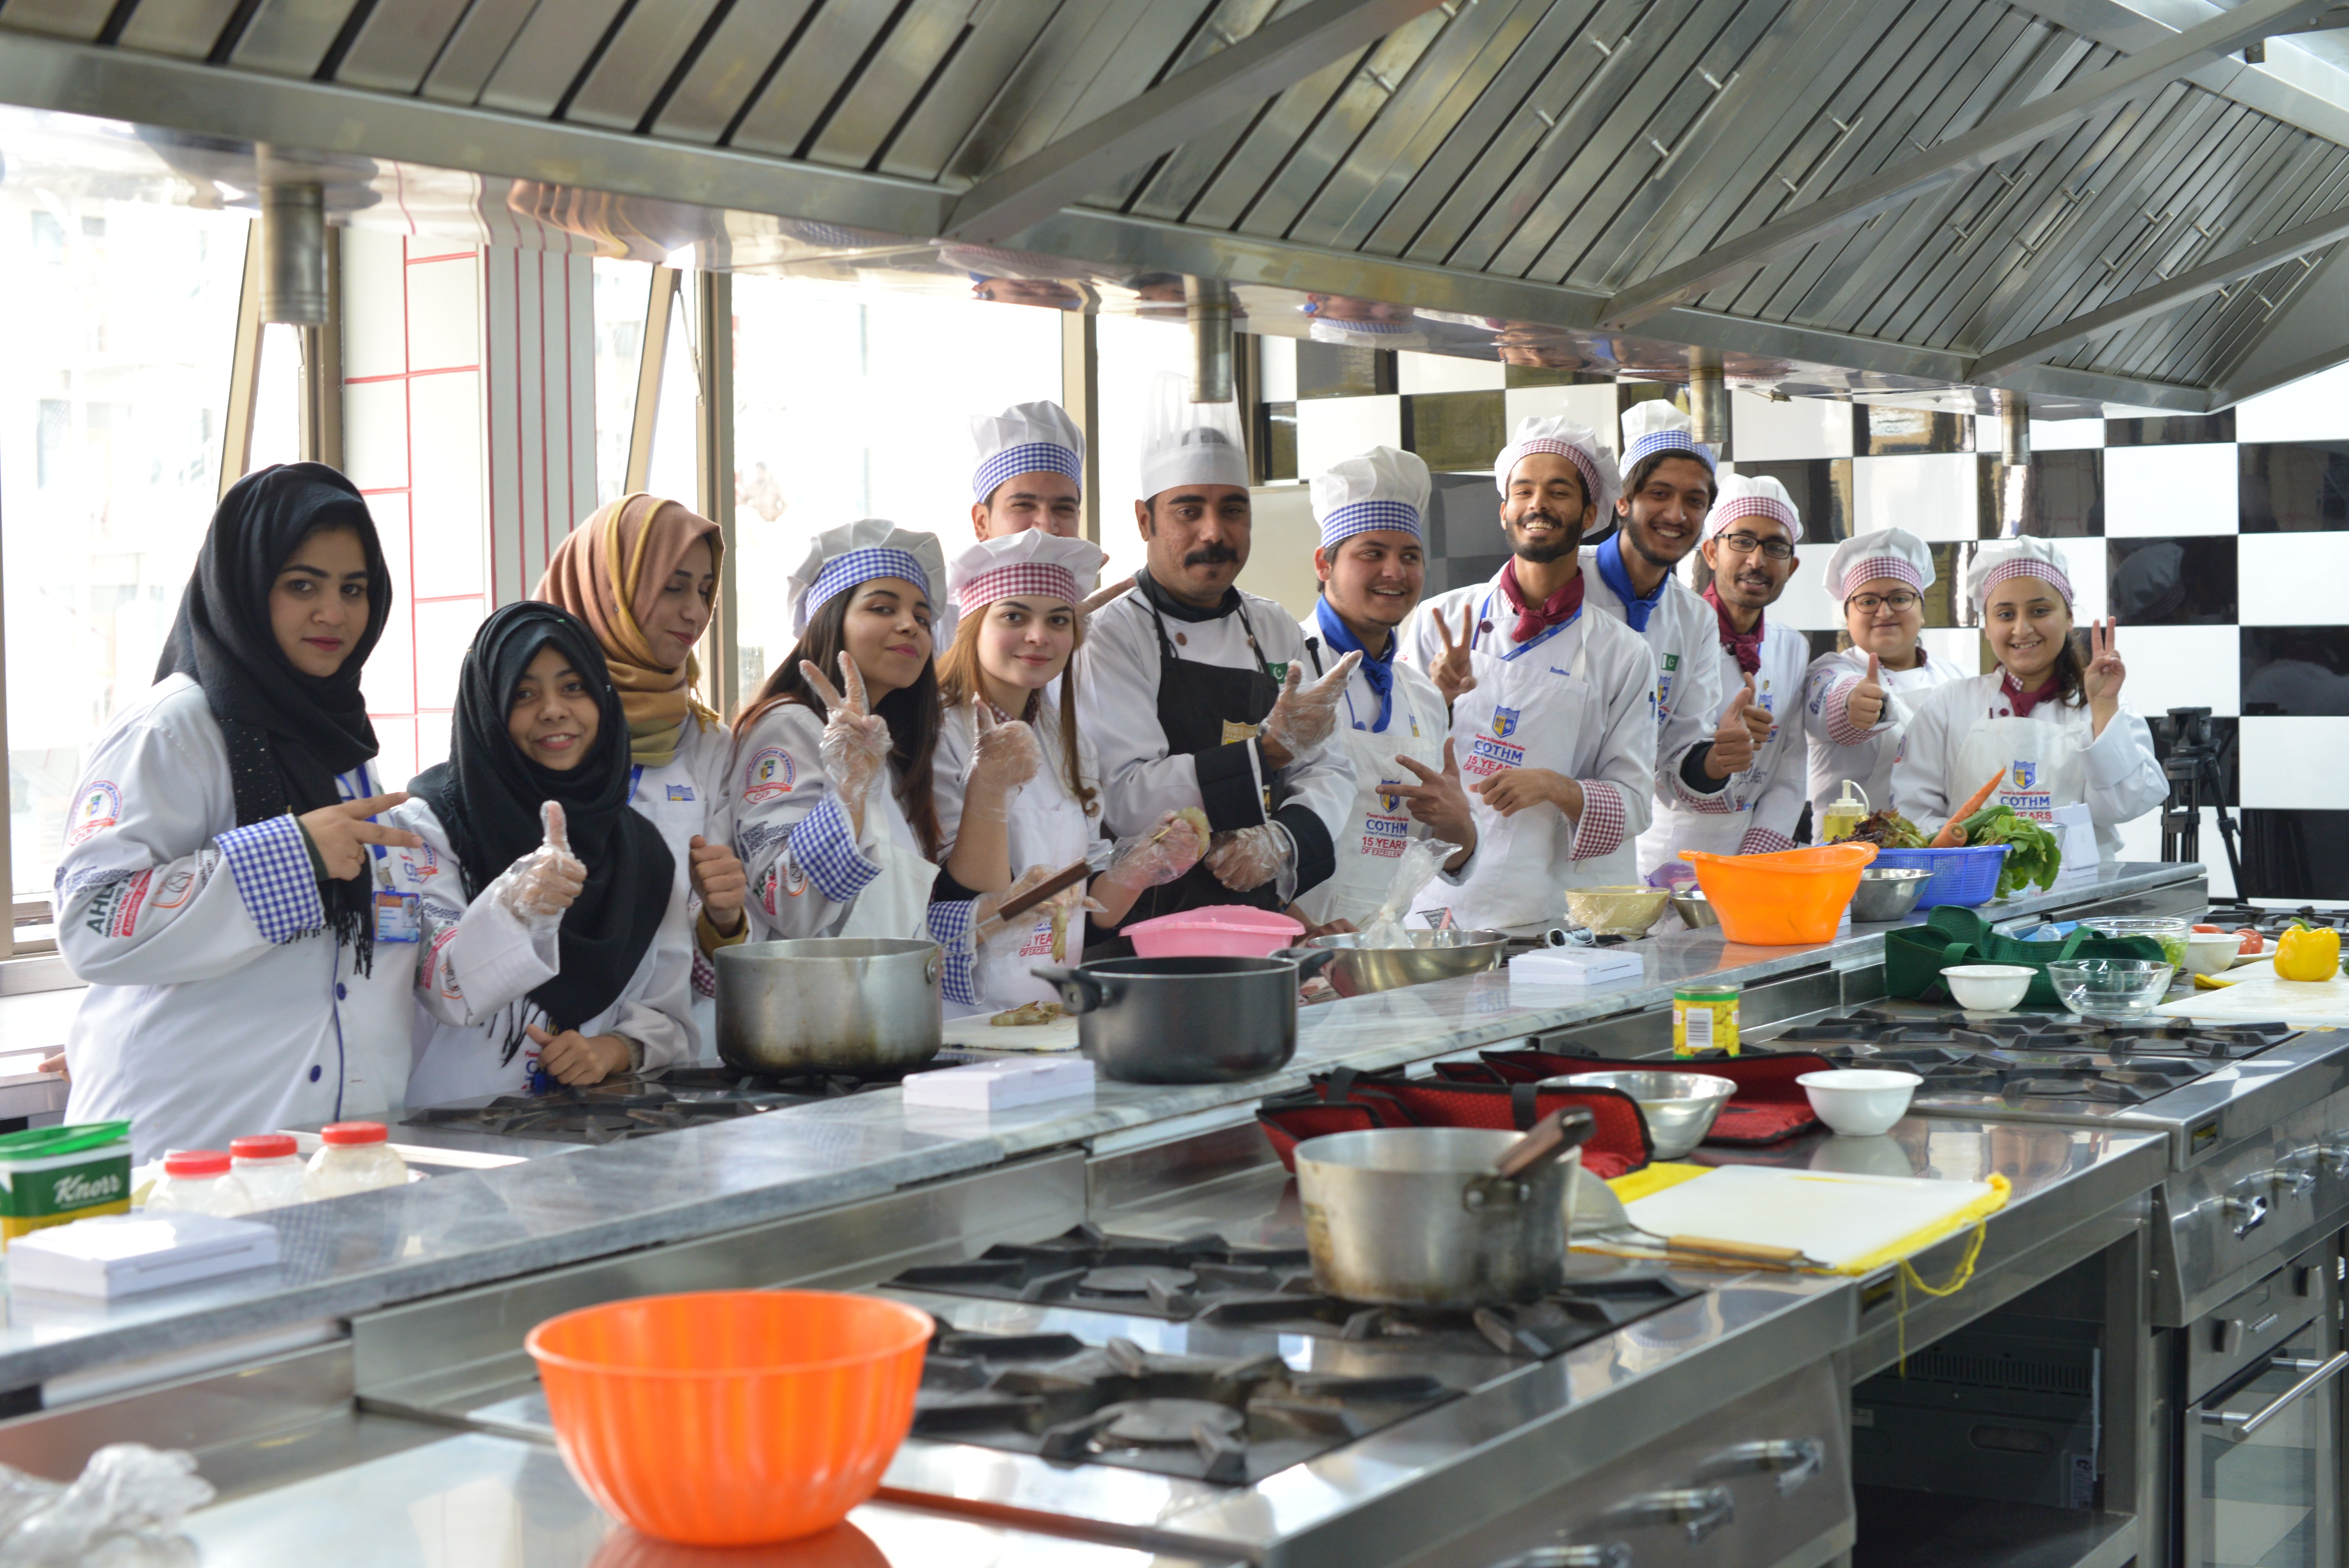 A group photo of students with chef